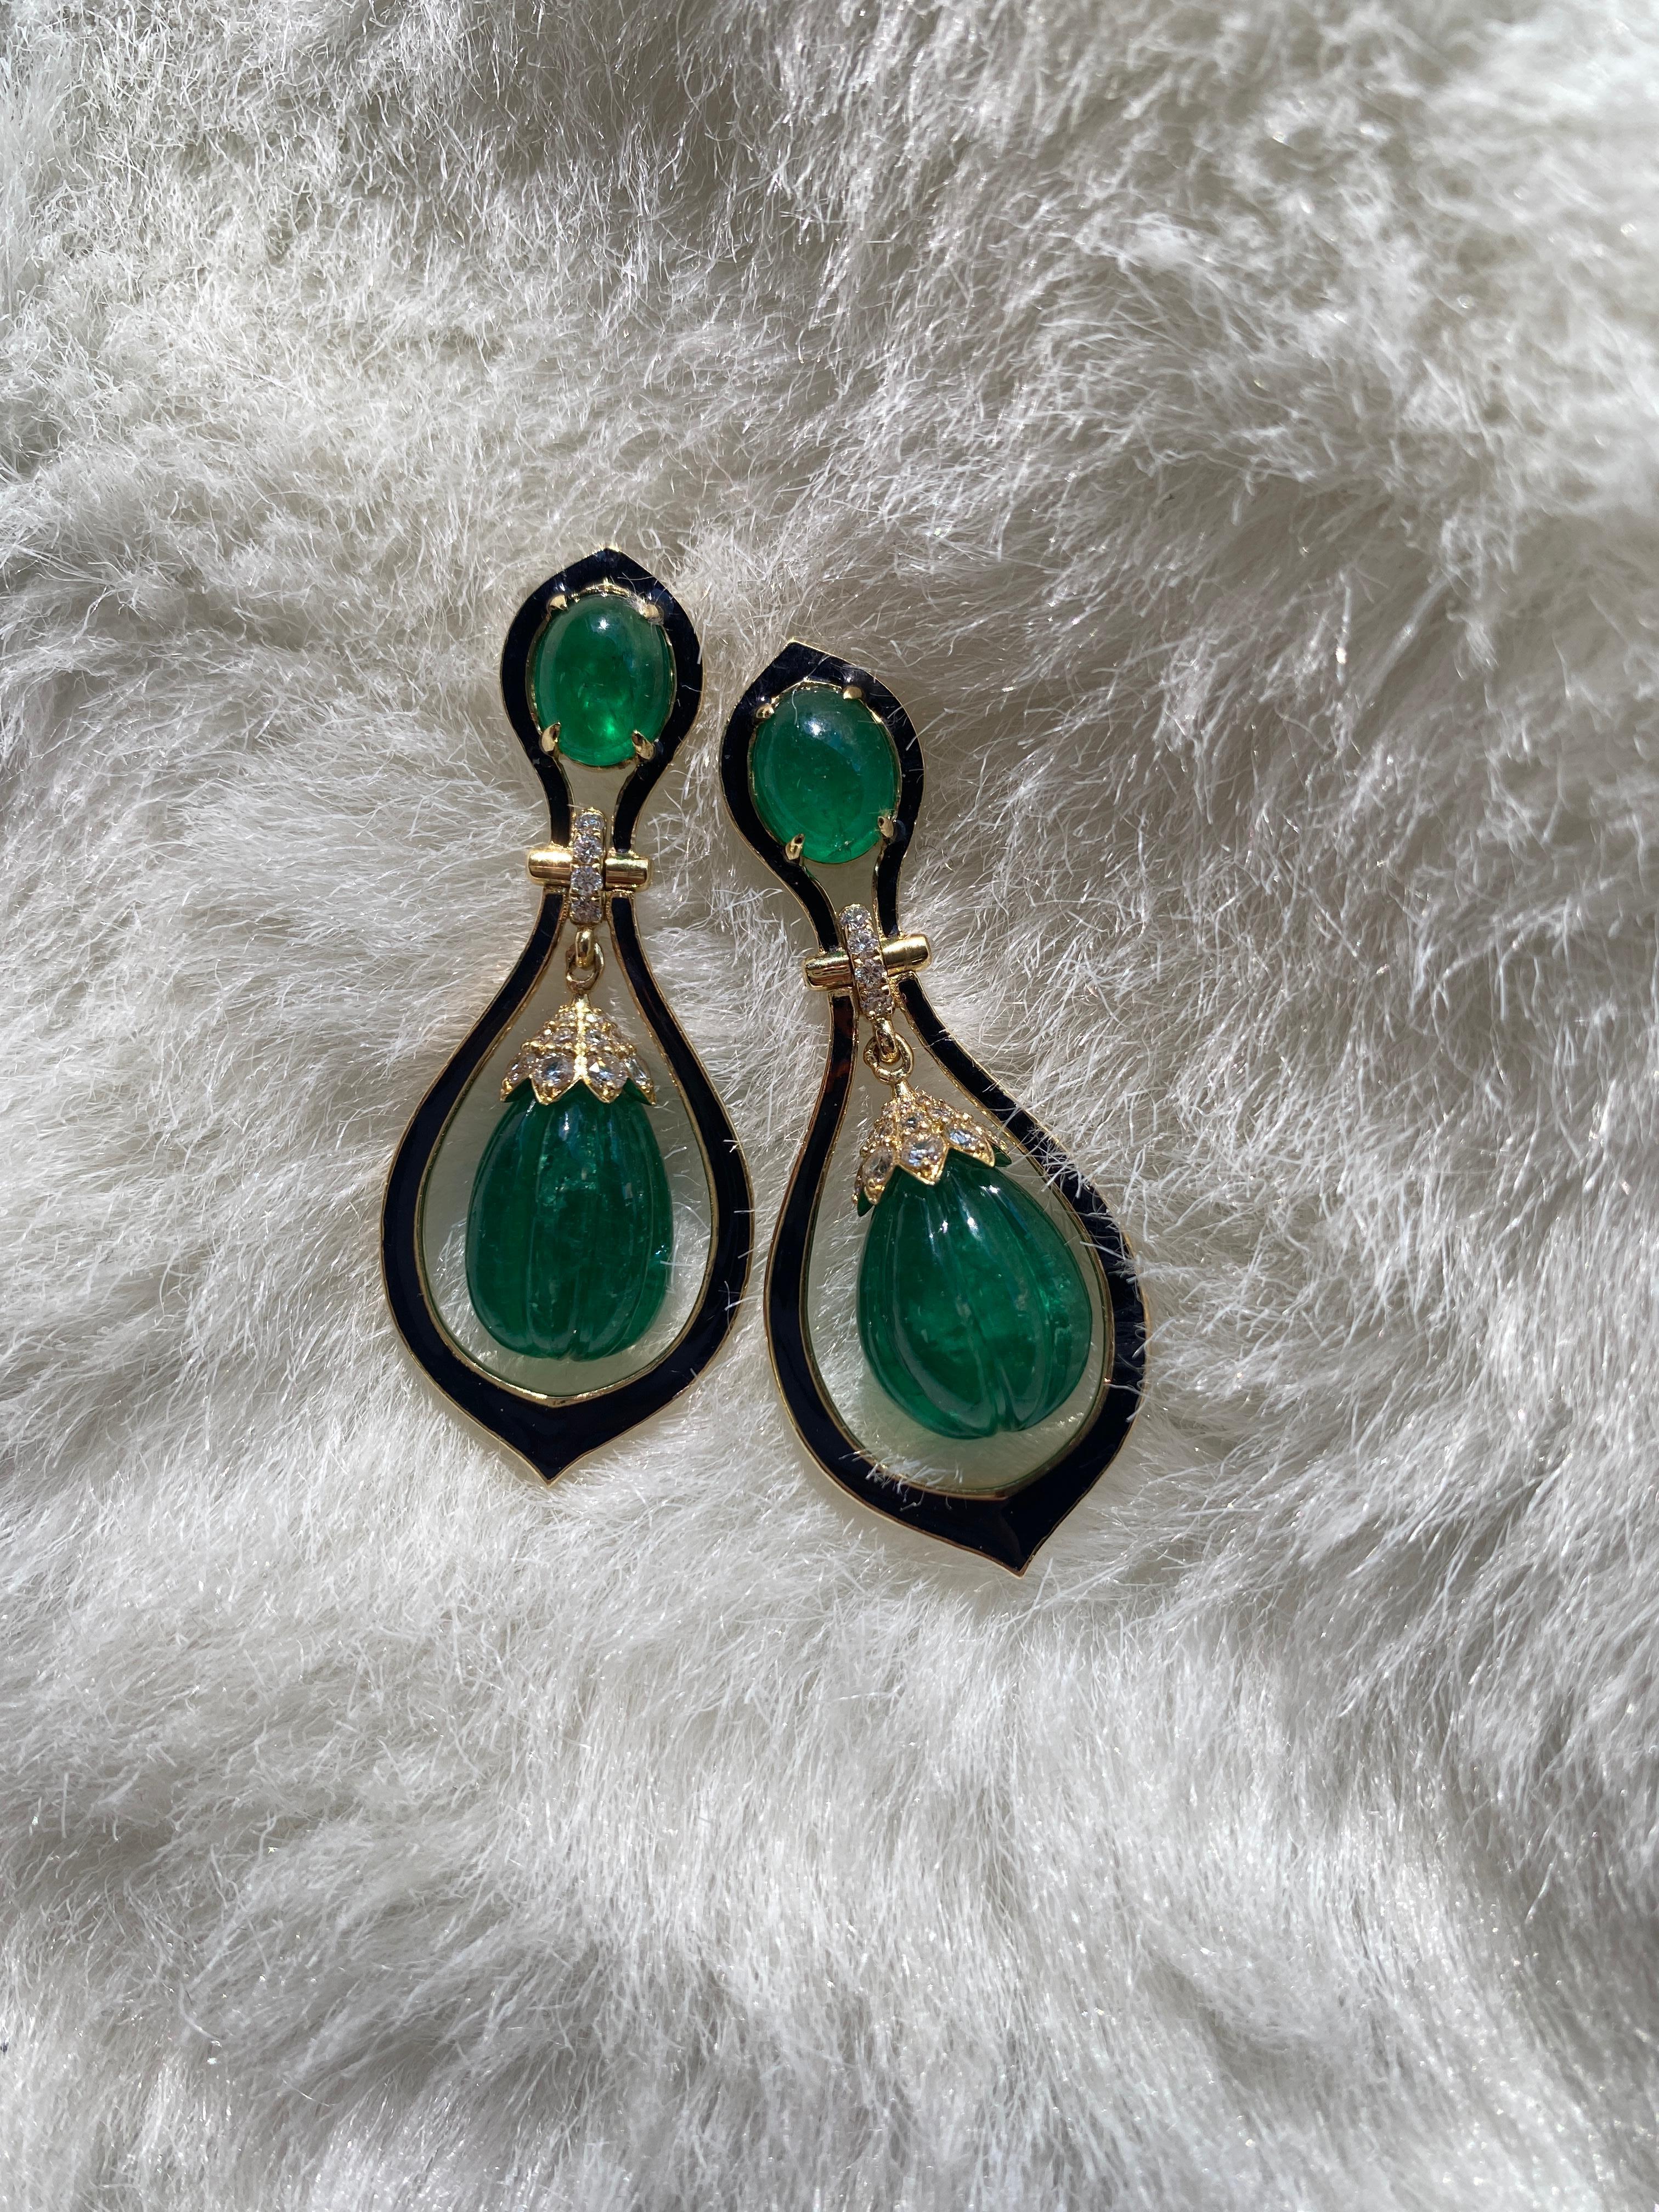 These unique Fluted Emerald Drops and Diamond Earrings with Black Enamel in 18K Yellow Gold from our 'G-One' Collection are a special piece to have in your personal Collection. The combination of enamel, diamonds & emerald represents power, richness